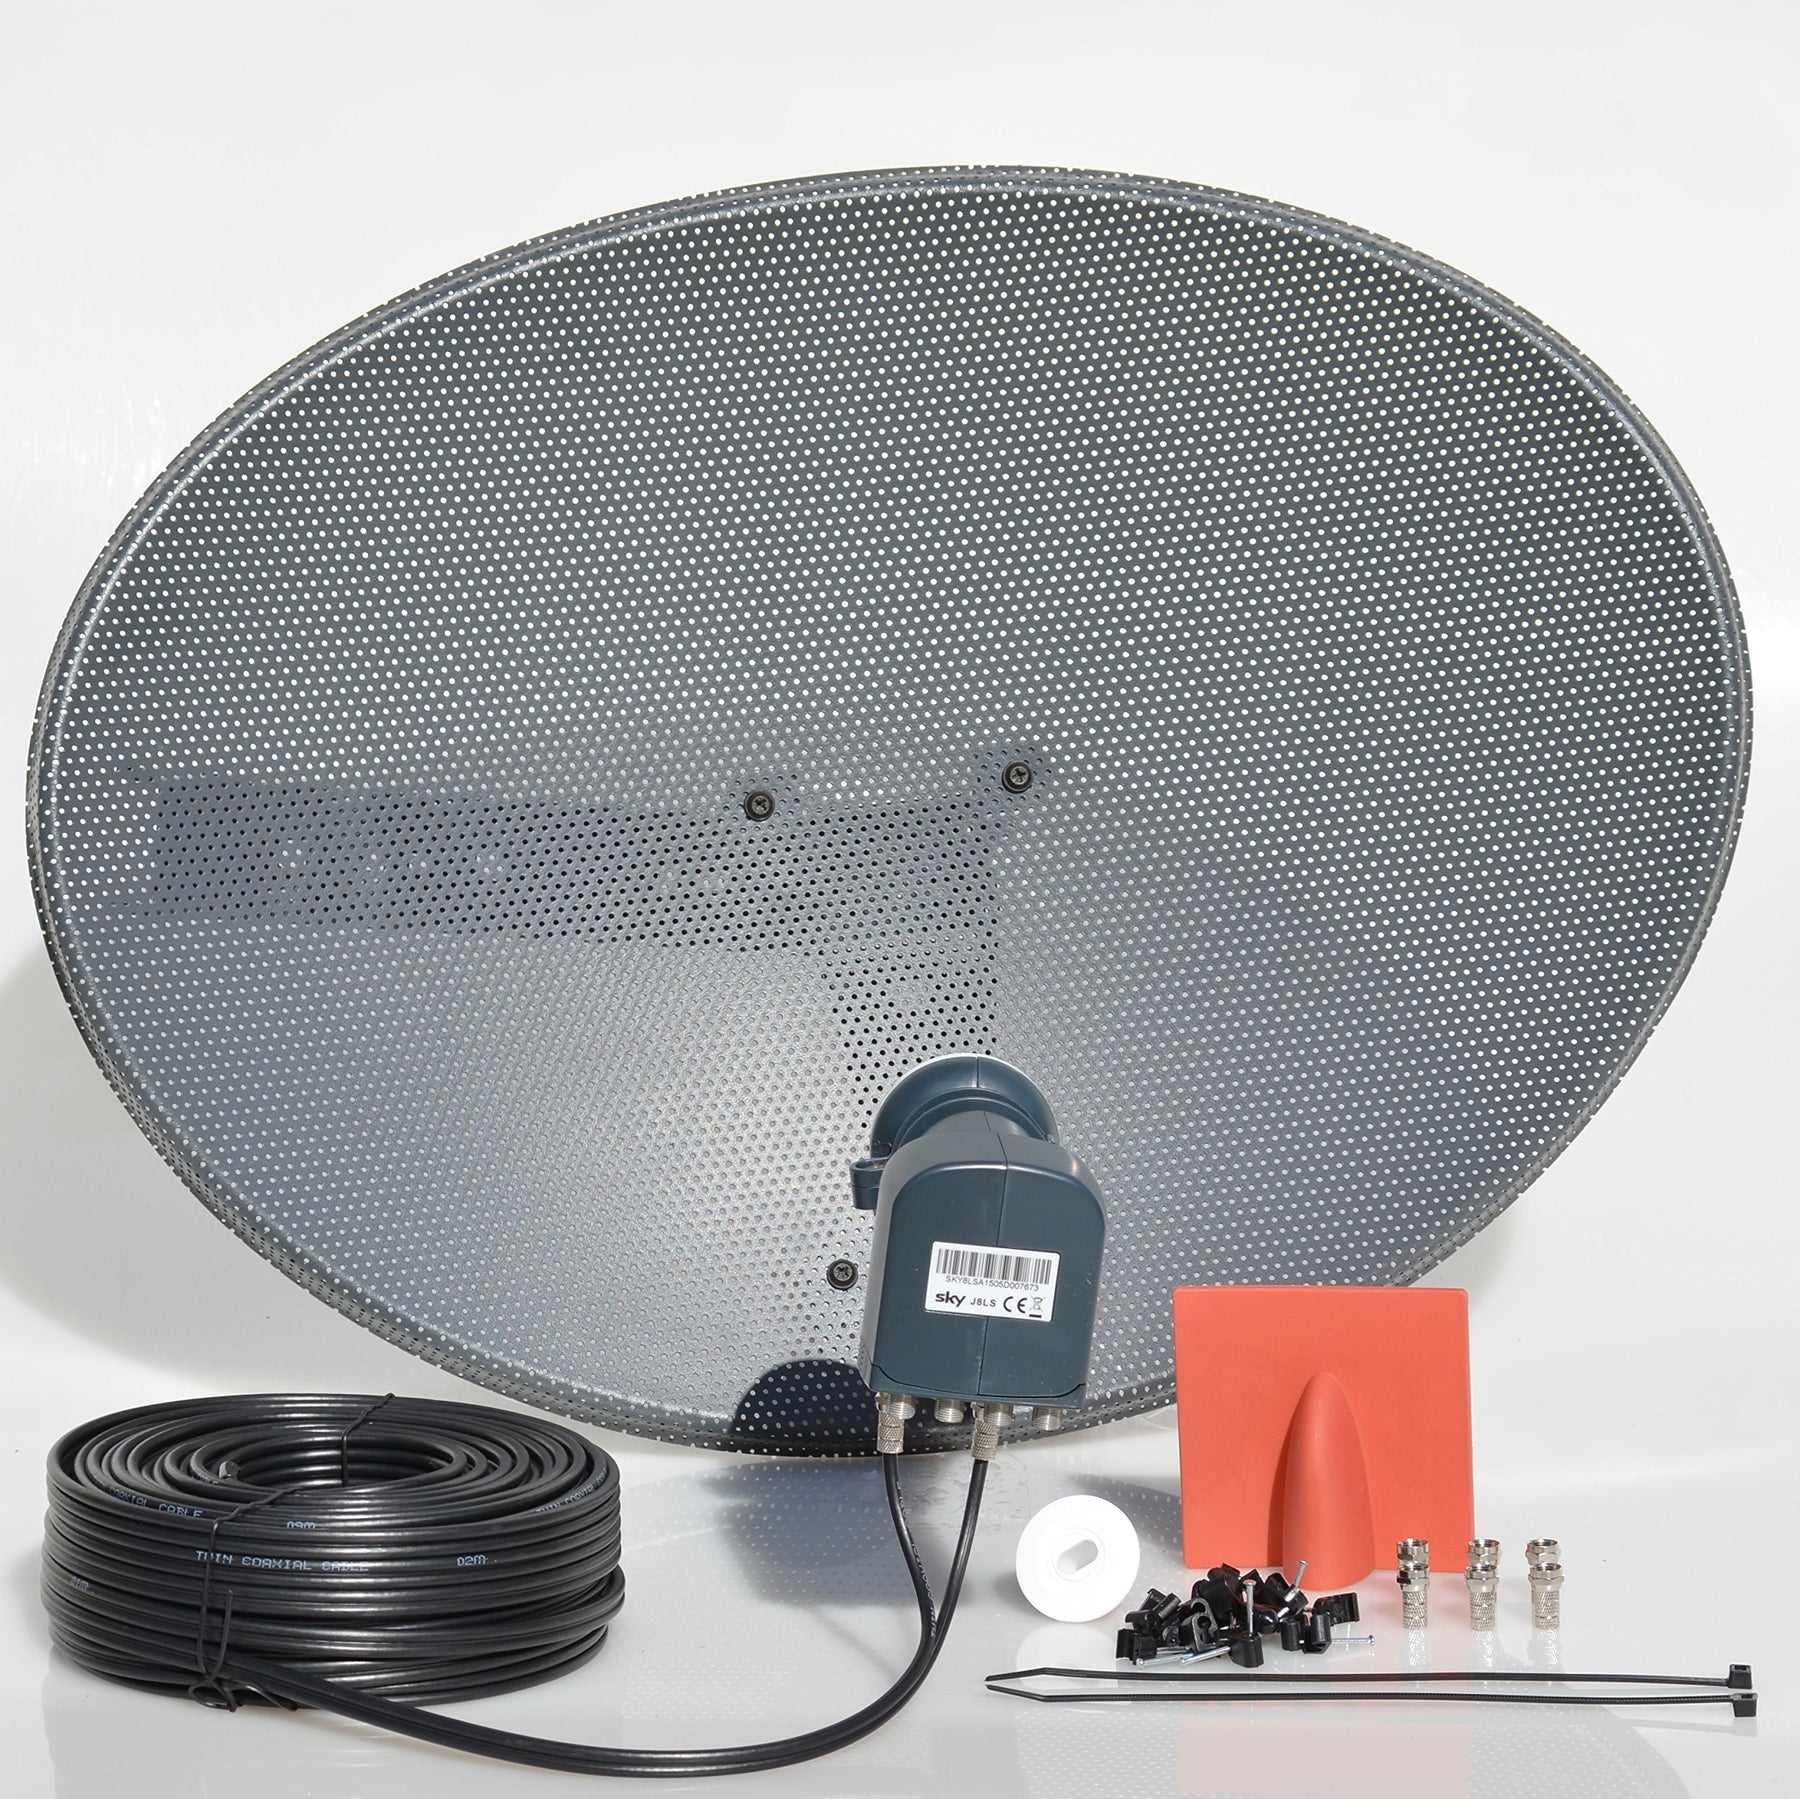 Viewi Freesat HDR Satellite Dish DIY Self Installation Kit,Latest Dish with Quad LNB,Twin coax Cable all necessary Brackets,Bolts and SATELLITE FINDER (White, Black Kit)